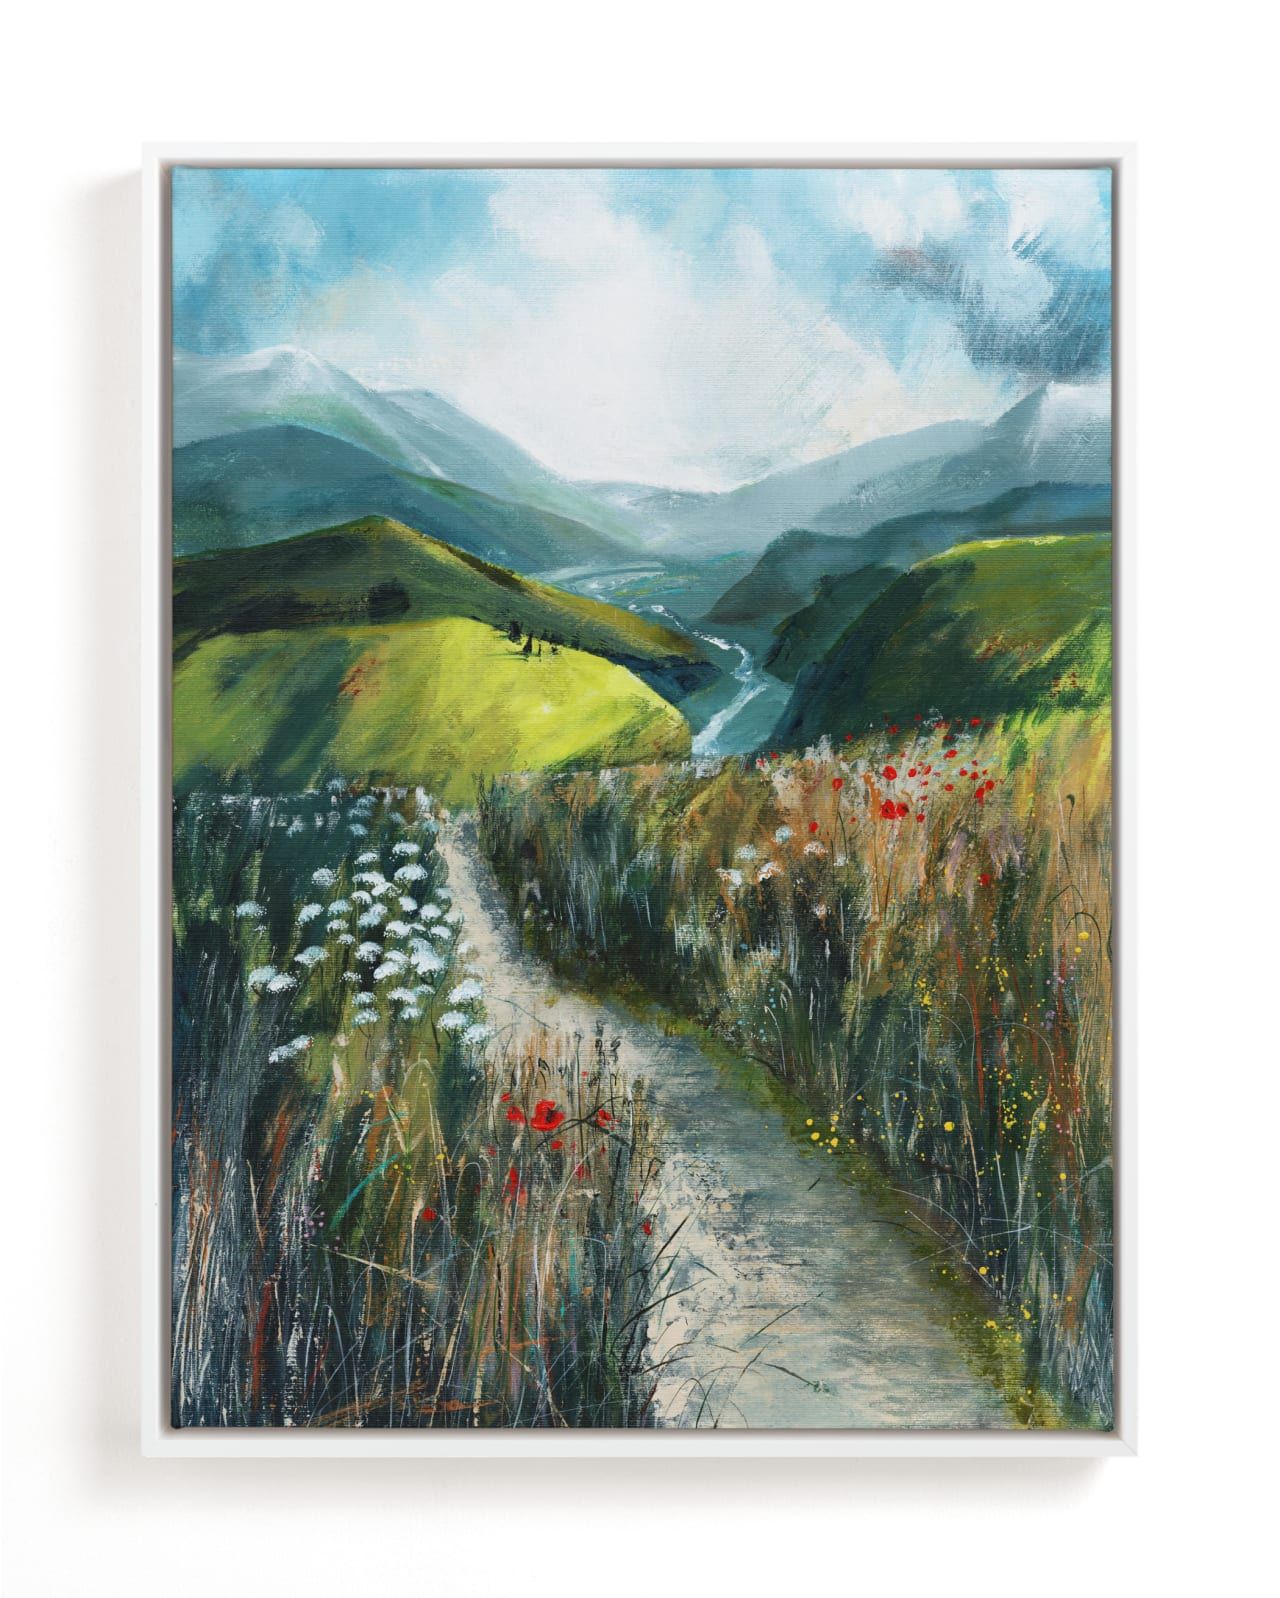 "Two Valleys II" - Painting Limited Edition Art Print by Luci Power. | Minted